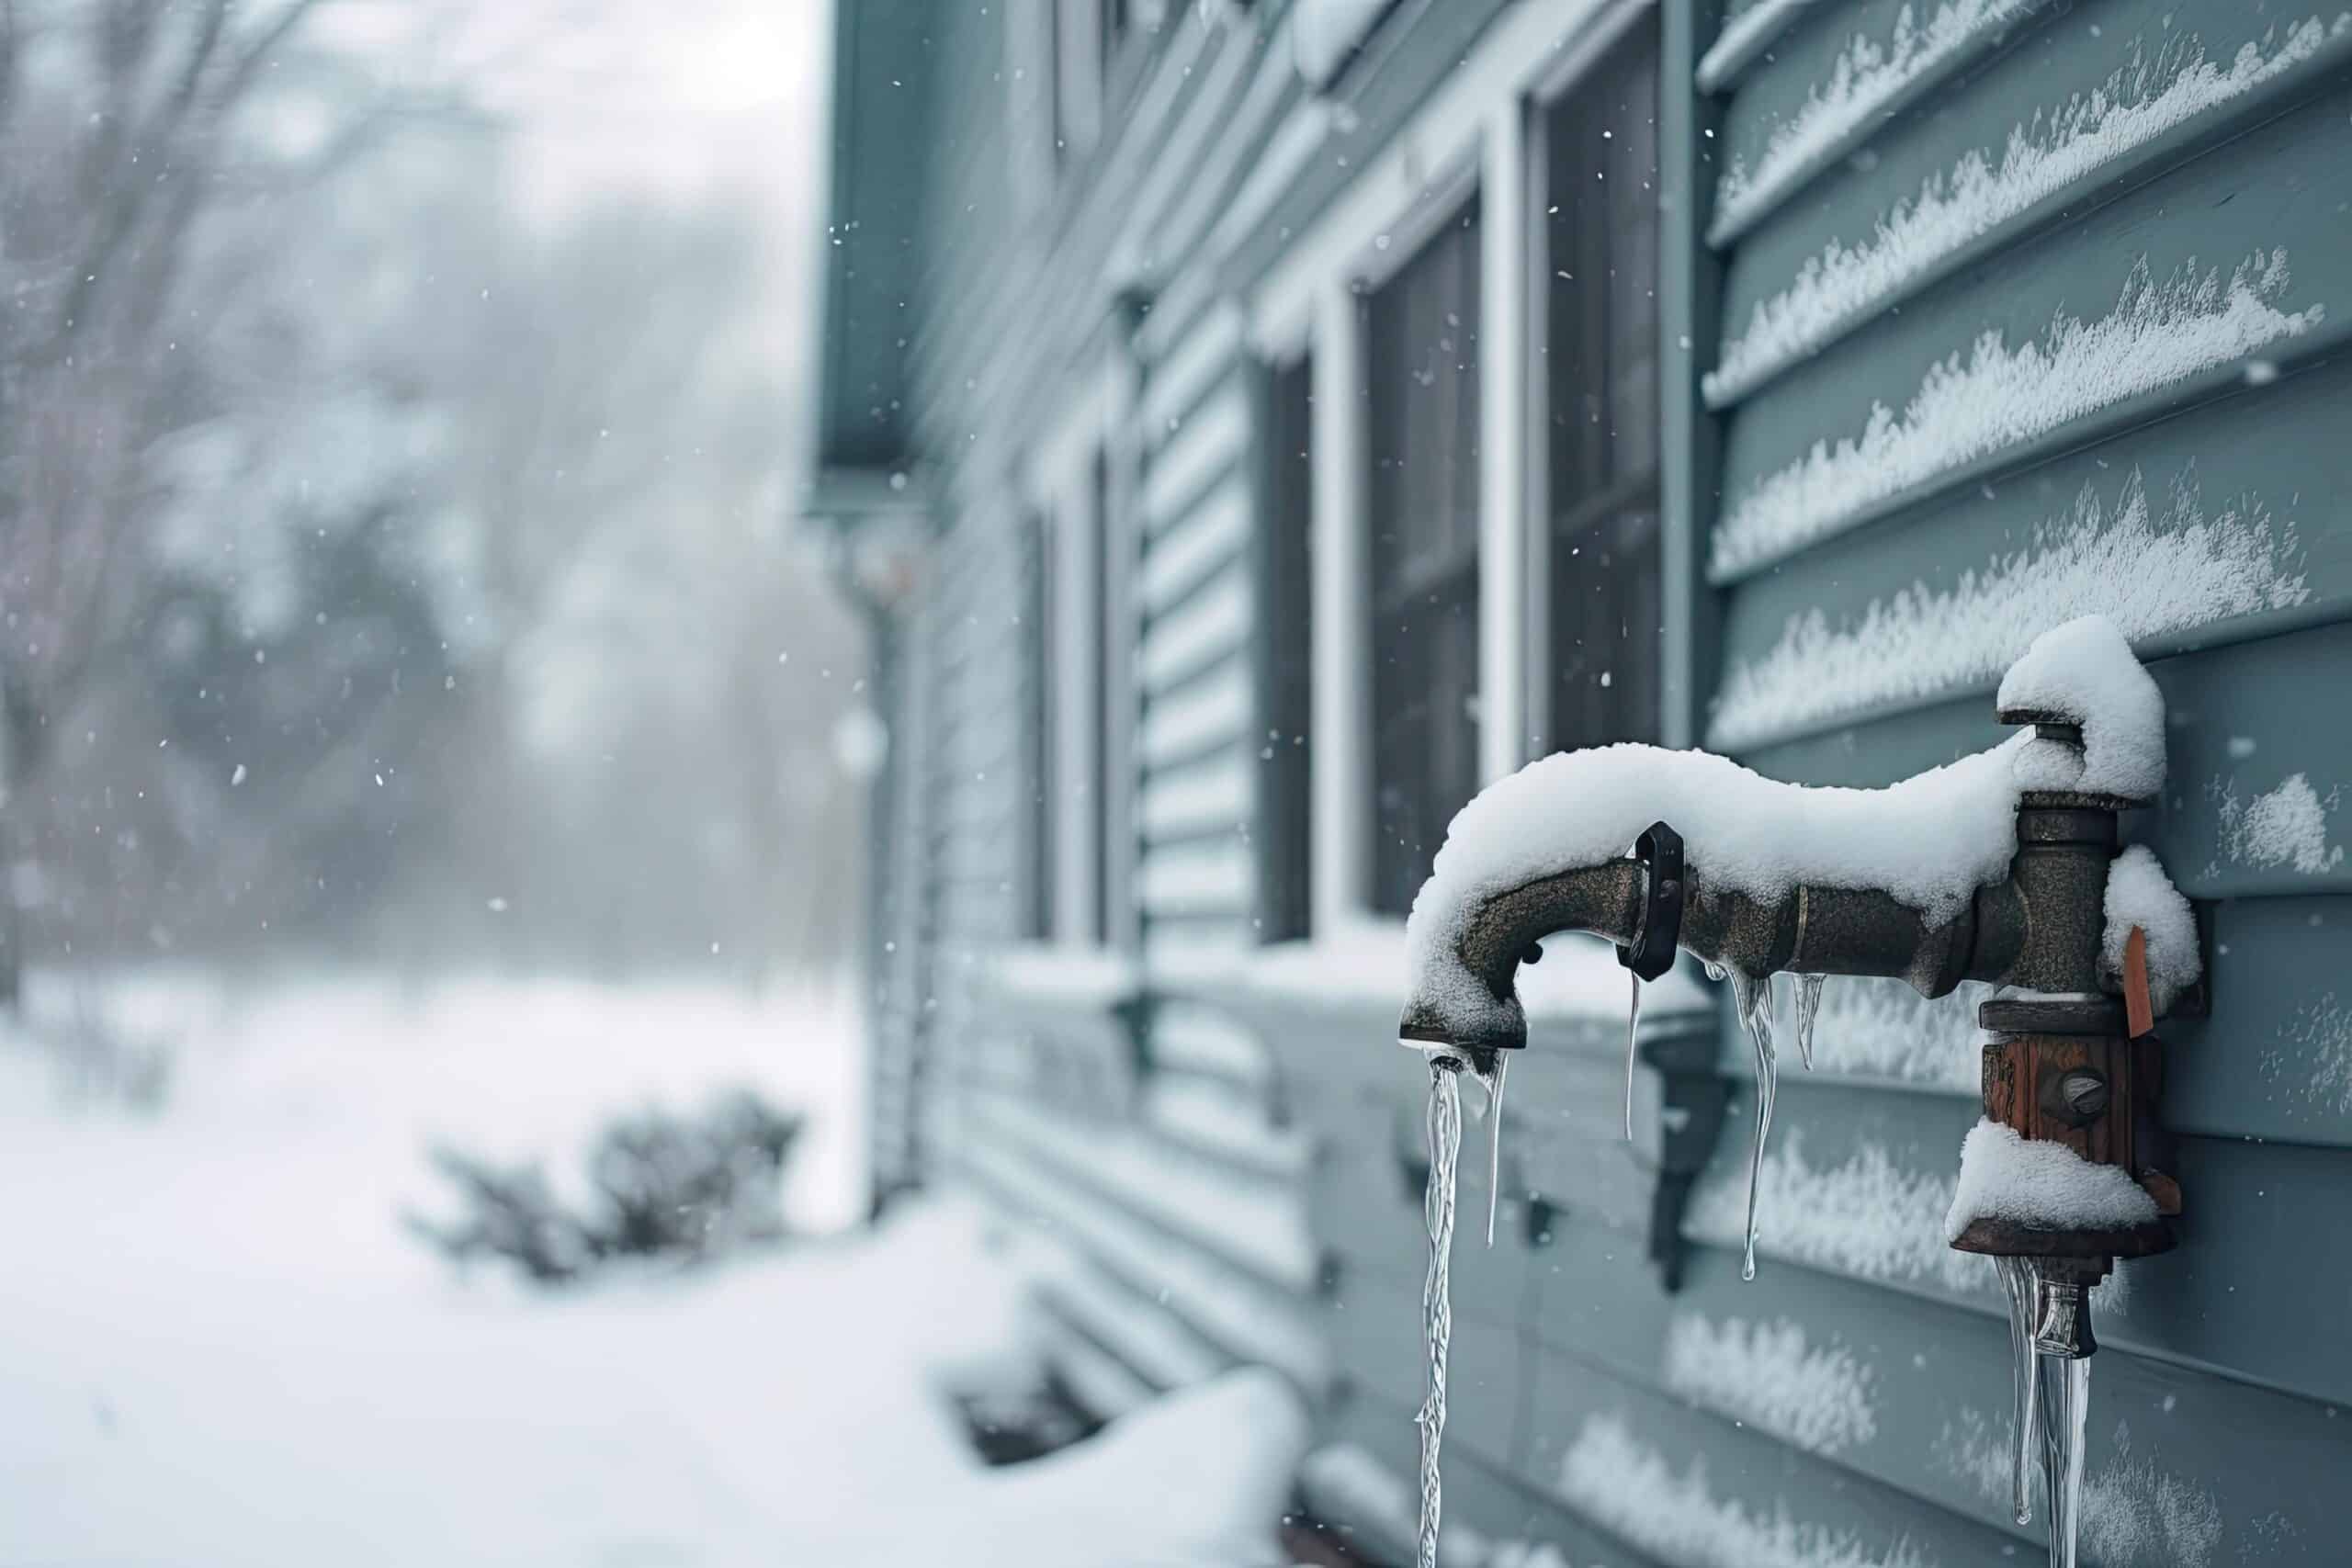 A picture of an outdoor faucet frozen in a snow storm